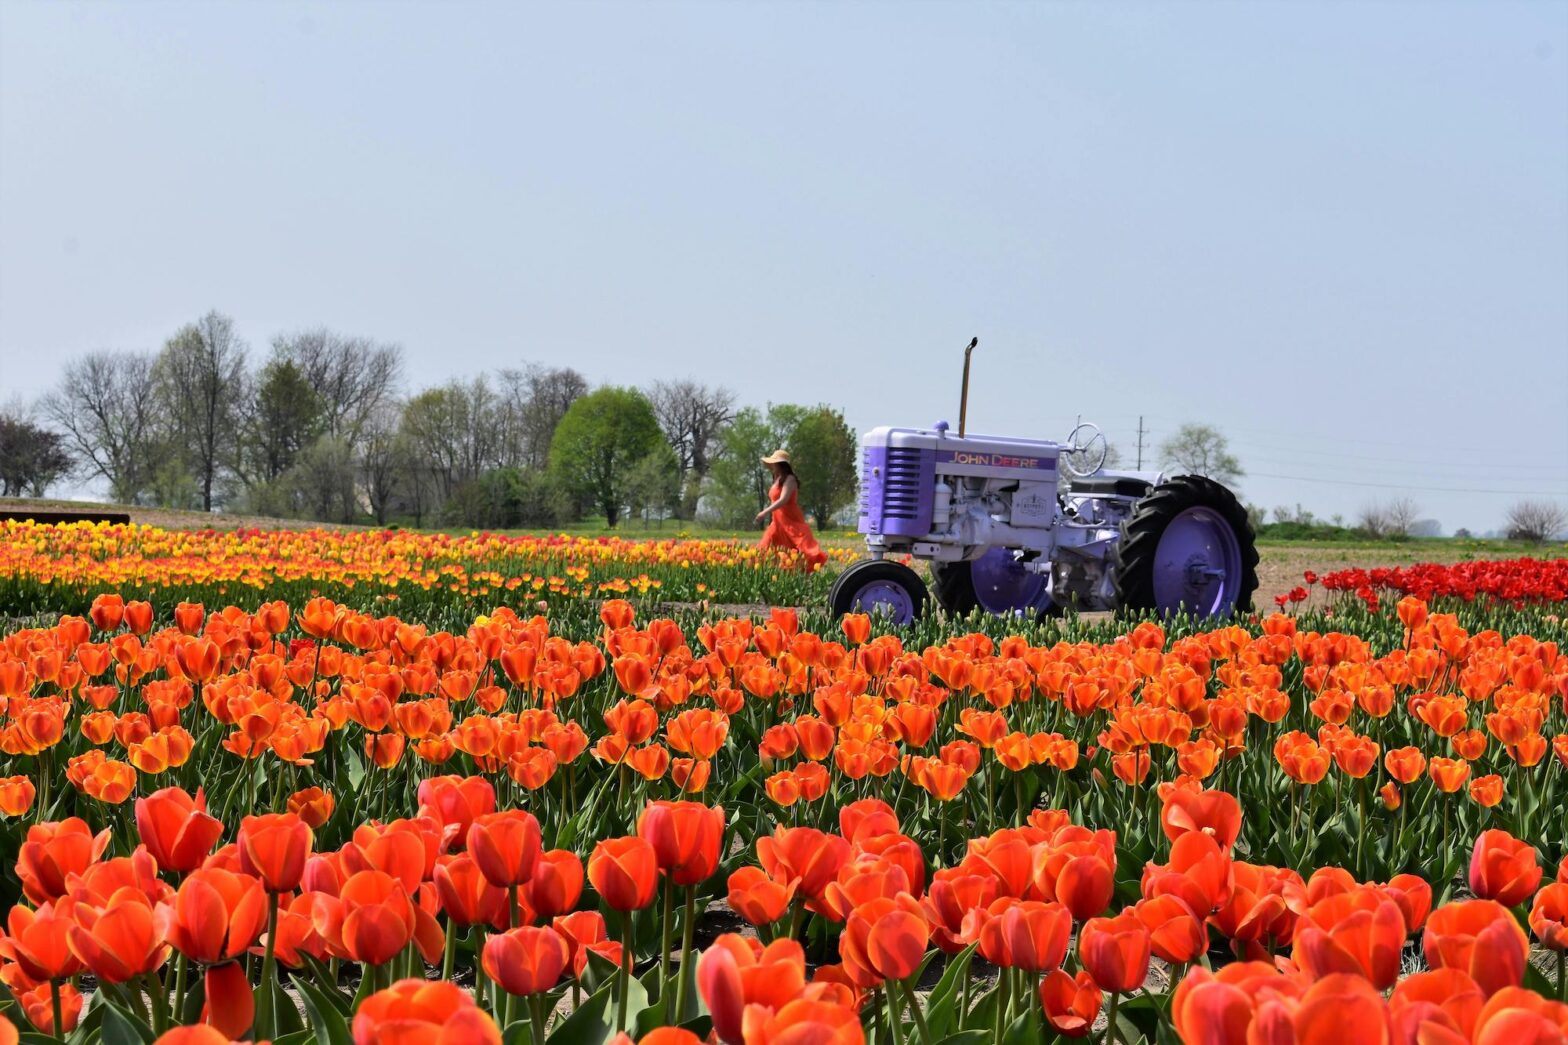 new tractor financed by TAG in a field of flowers